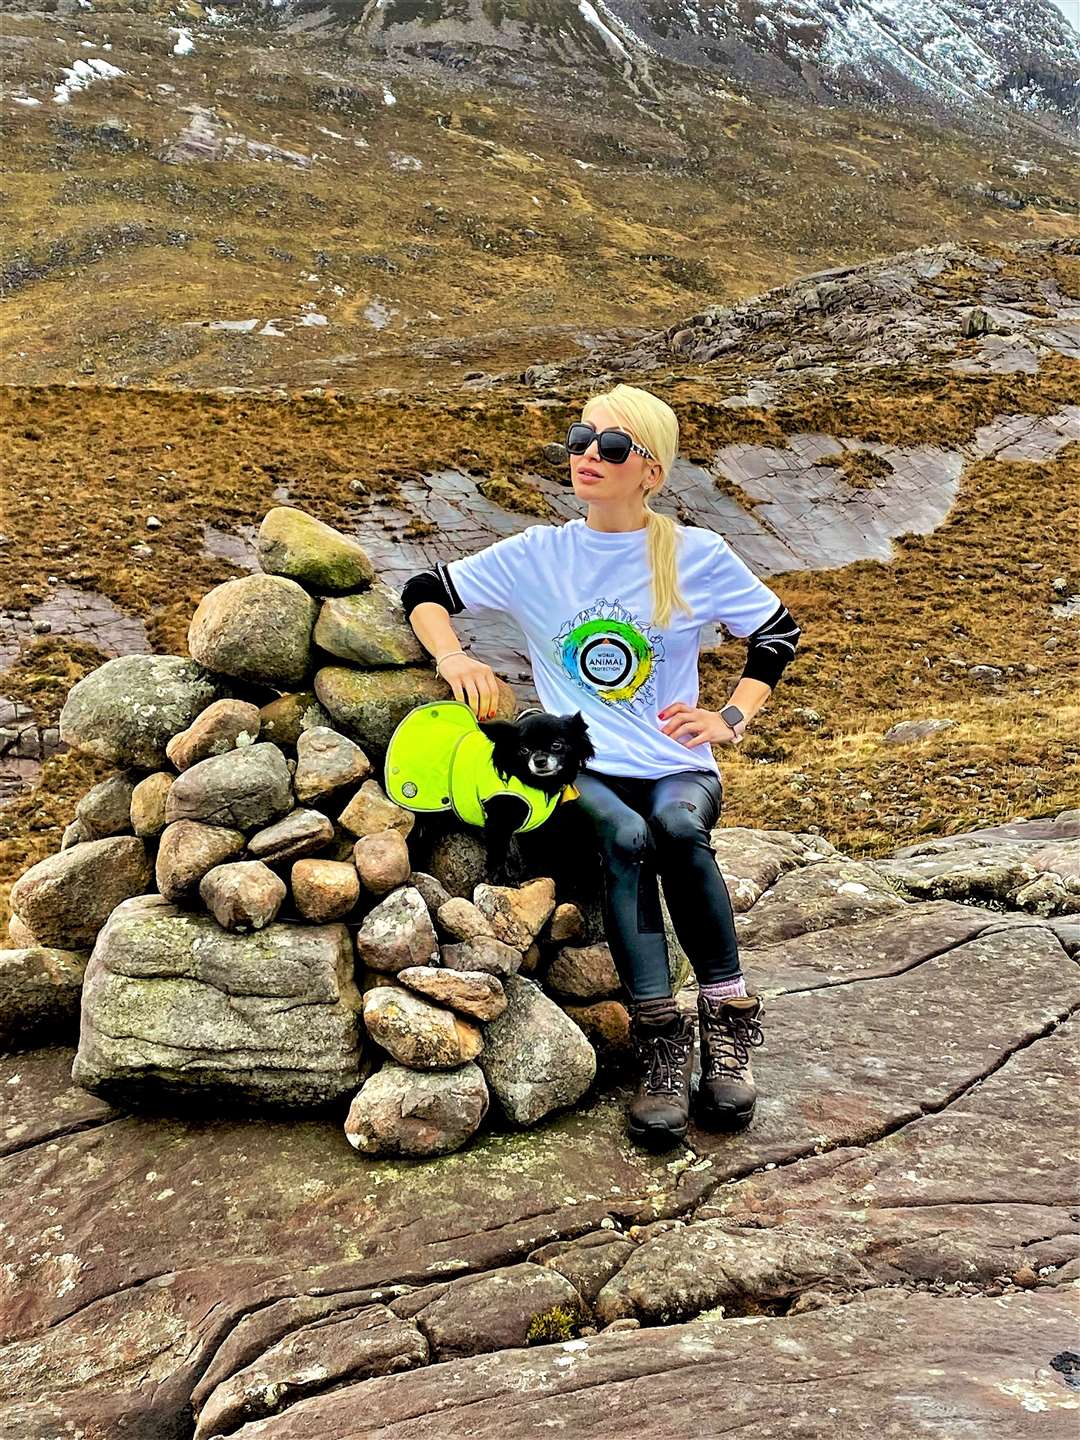 Striking a pose at a cairn by the mountain.